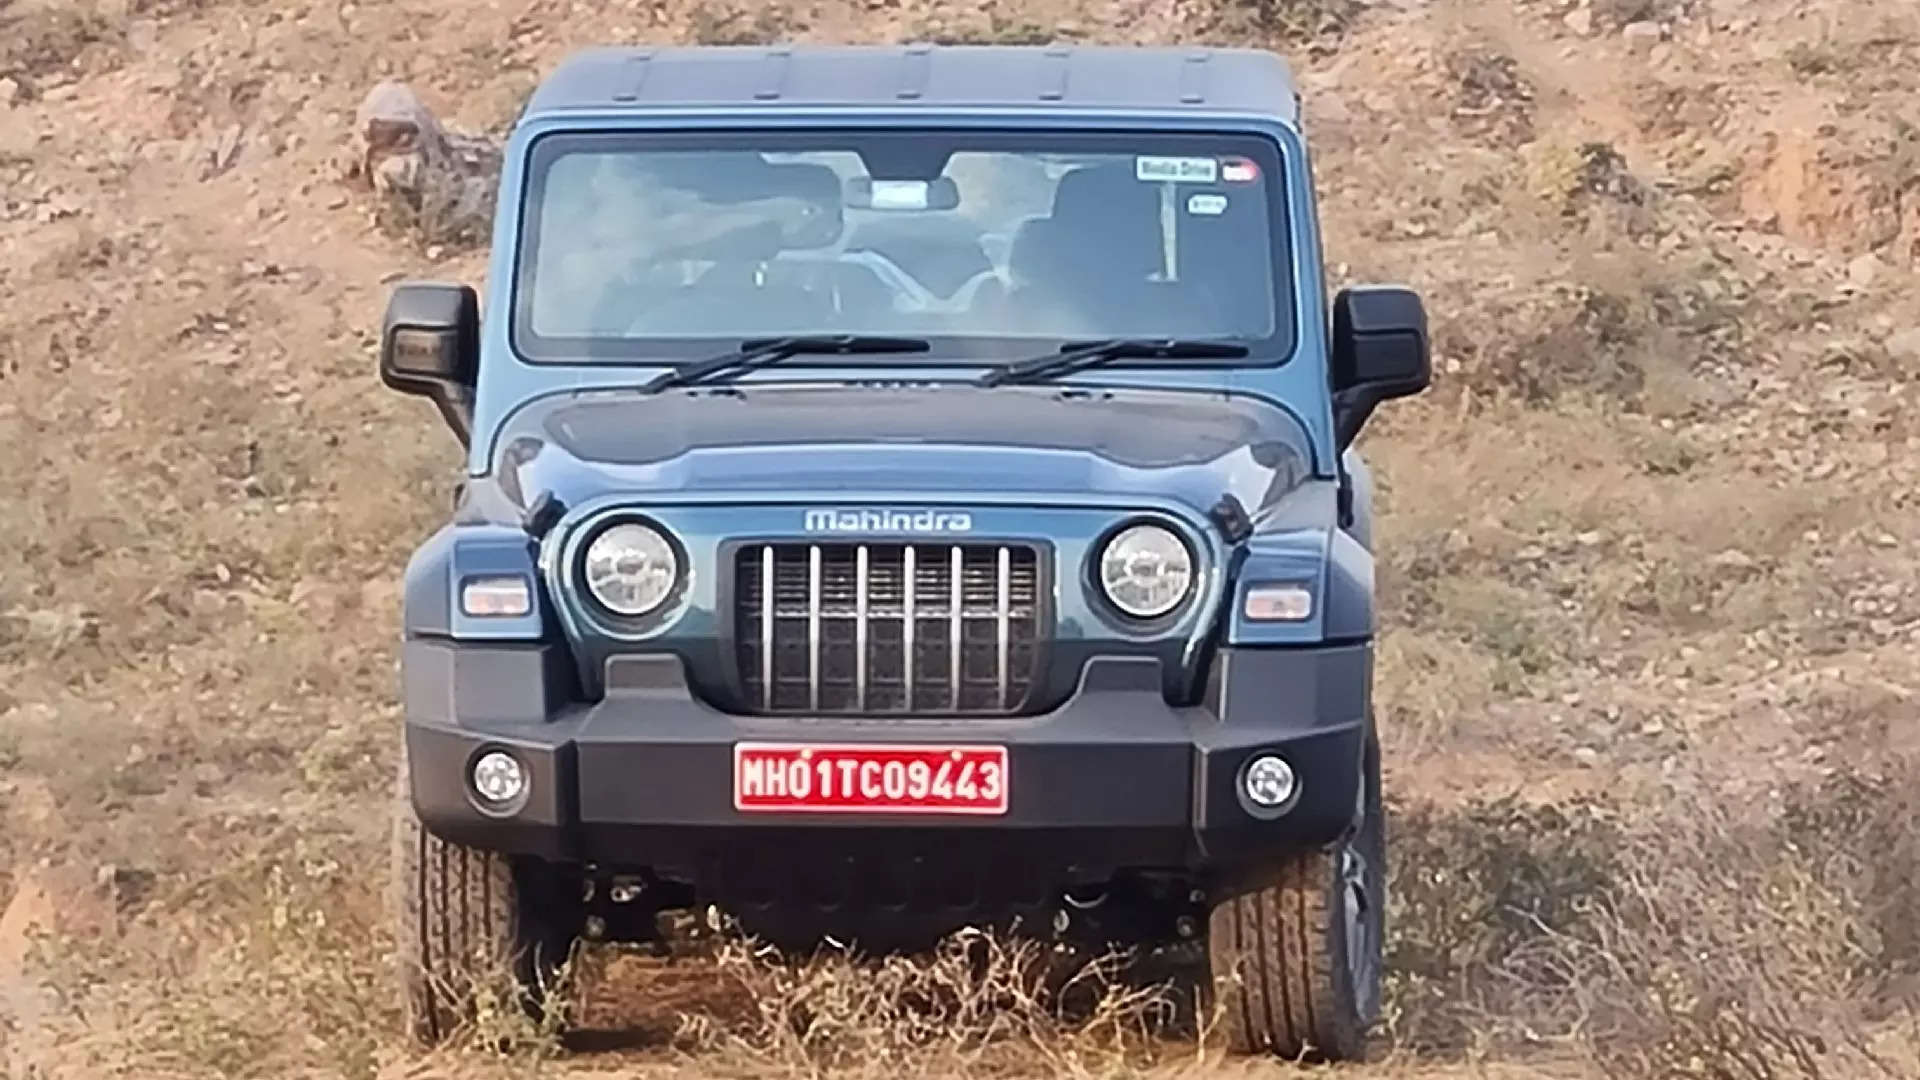 5 reasons why you should but the Thar RWD, and three reasons you should skip